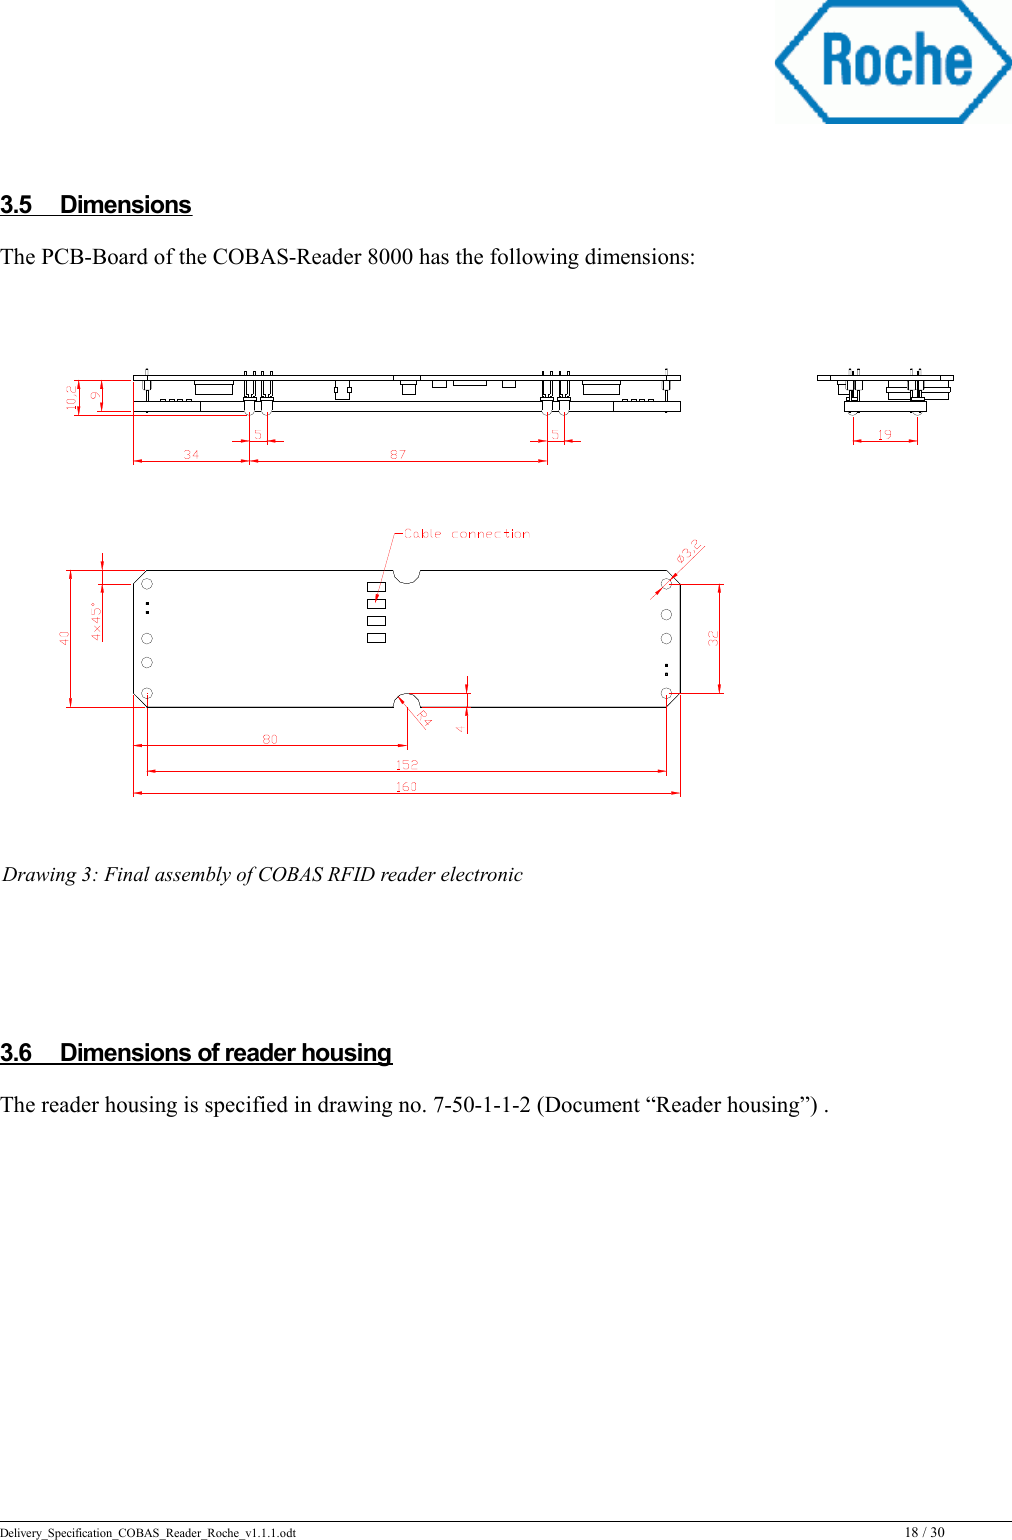  3.5         Dimensions       The PCB-Board of the COBAS-Reader 8000 has the following dimensions:3.6         Dimensions of reader housing       The reader housing is specified in drawing no. 7-50-1-1-2 (Document “Reader housing”) .Delivery_Specification_COBAS_Reader_Roche_v1.1.1.odt 18 / 30Drawing 3: Final assembly of COBAS RFID reader electronic